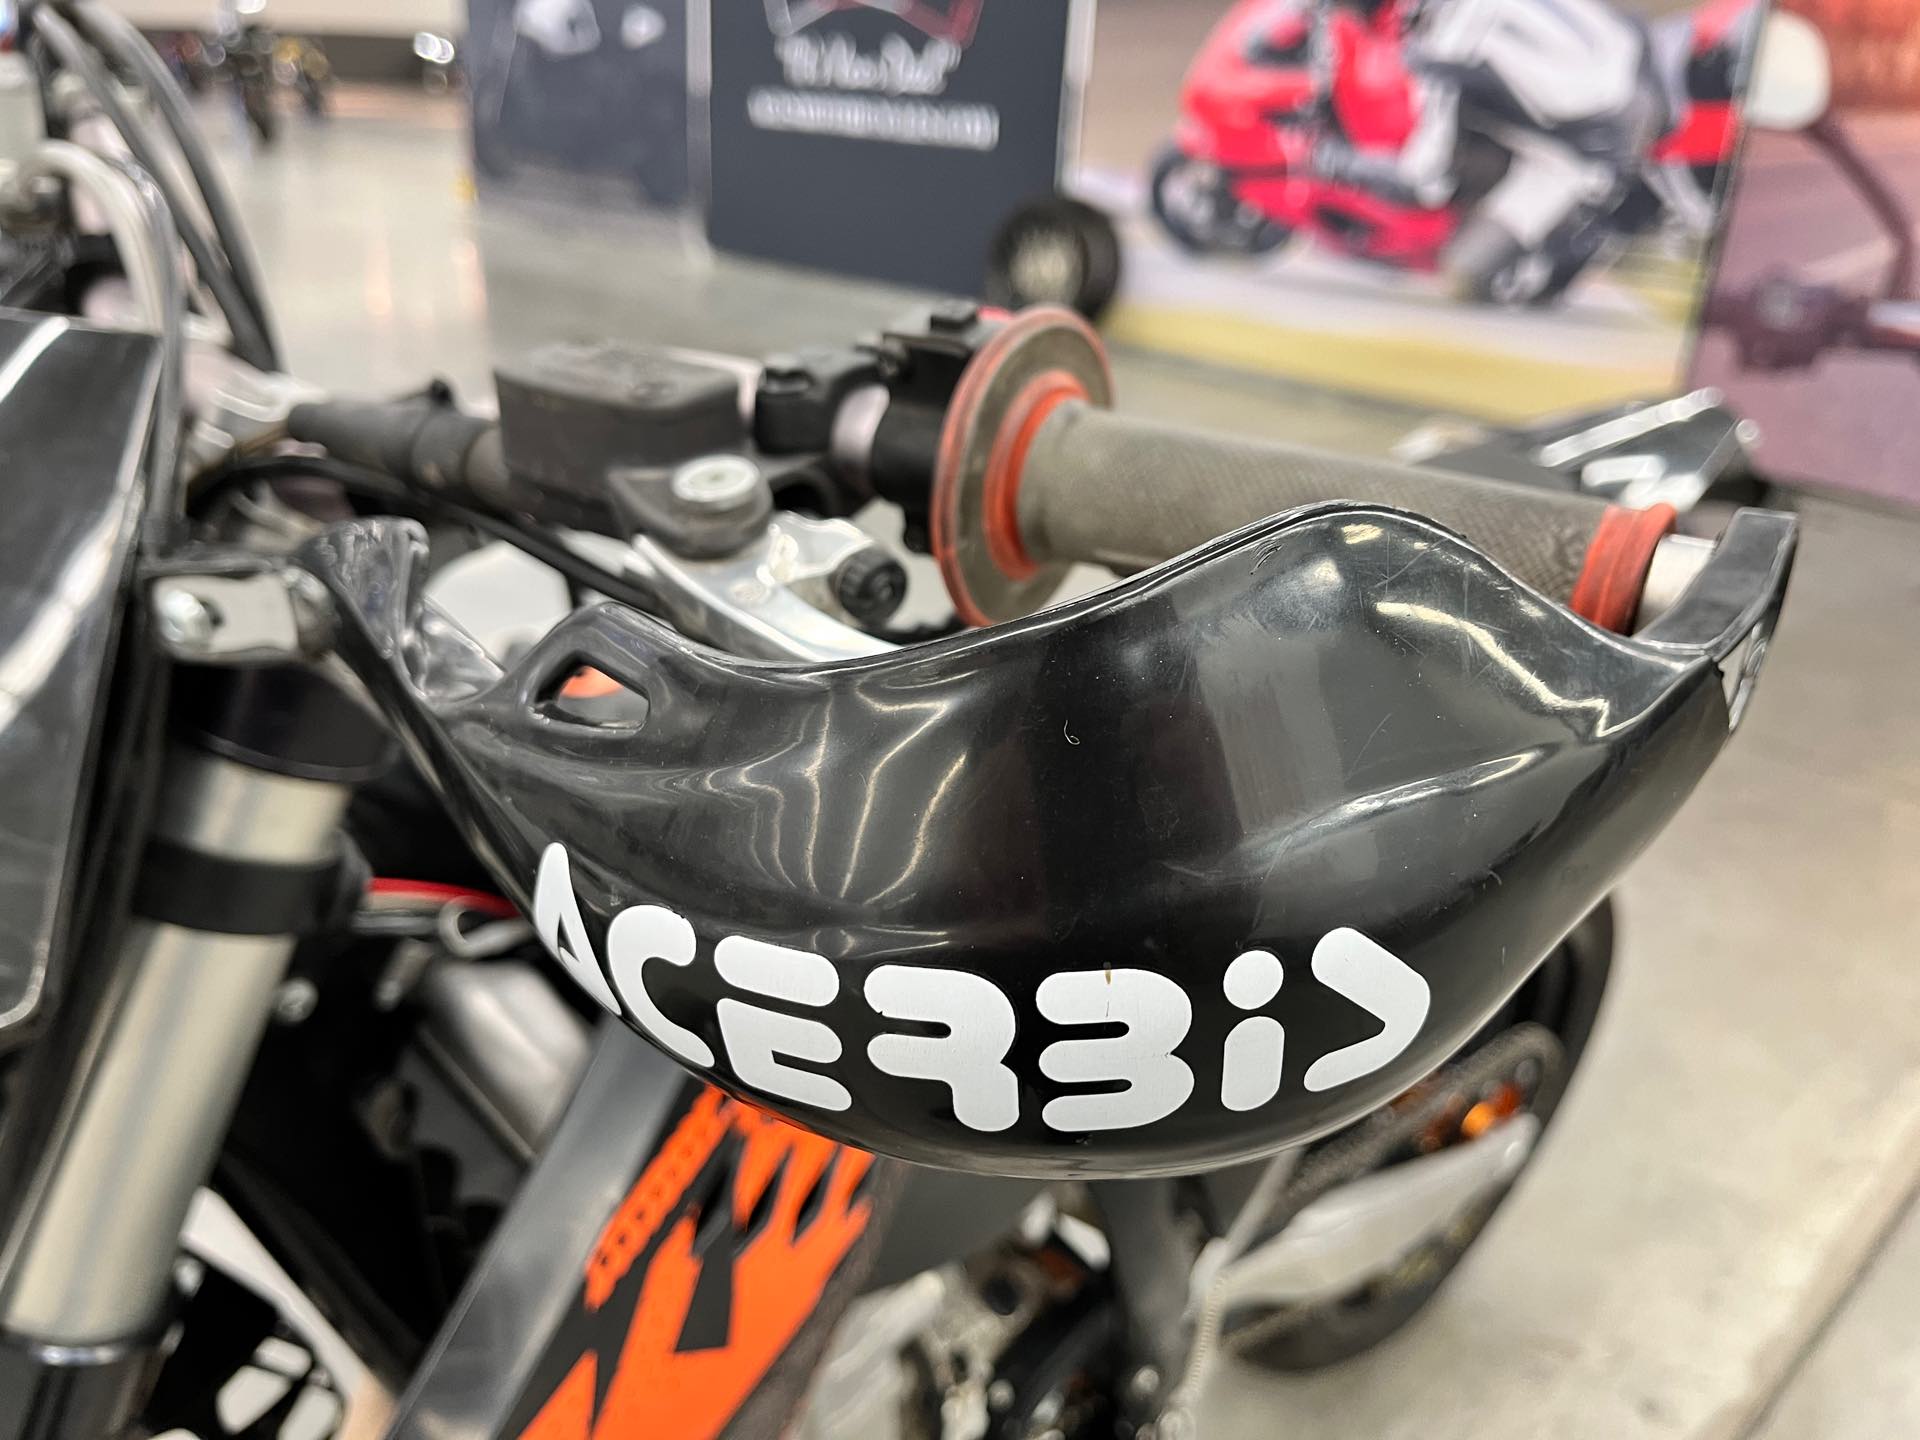 2009 KTM EXC 530 at Aces Motorcycles - Denver